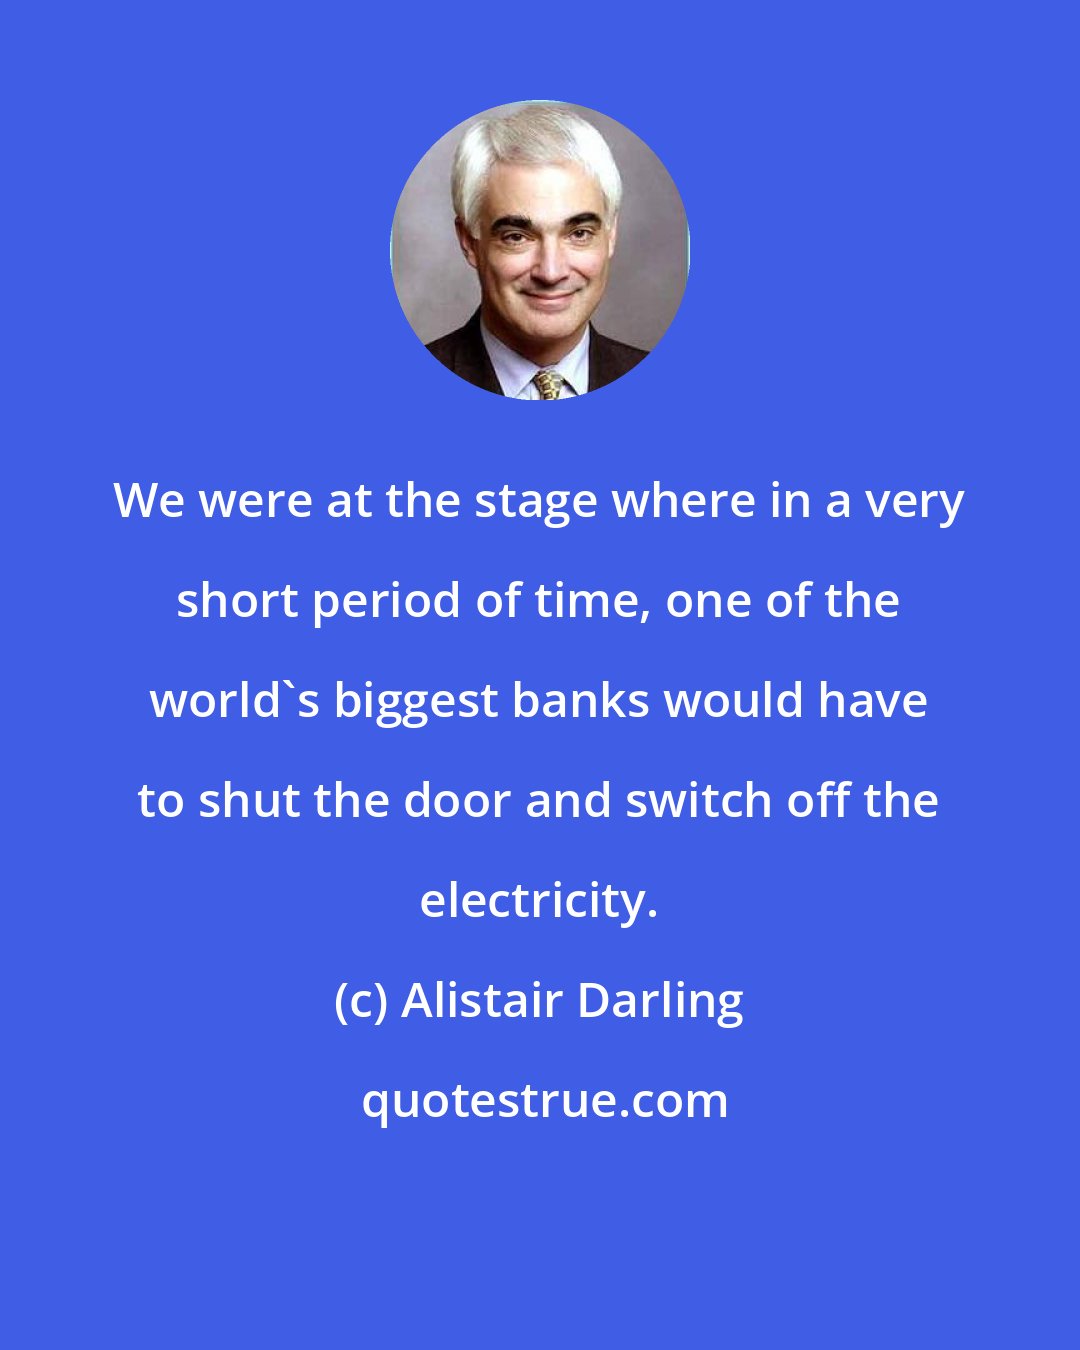 Alistair Darling: We were at the stage where in a very short period of time, one of the world's biggest banks would have to shut the door and switch off the electricity.